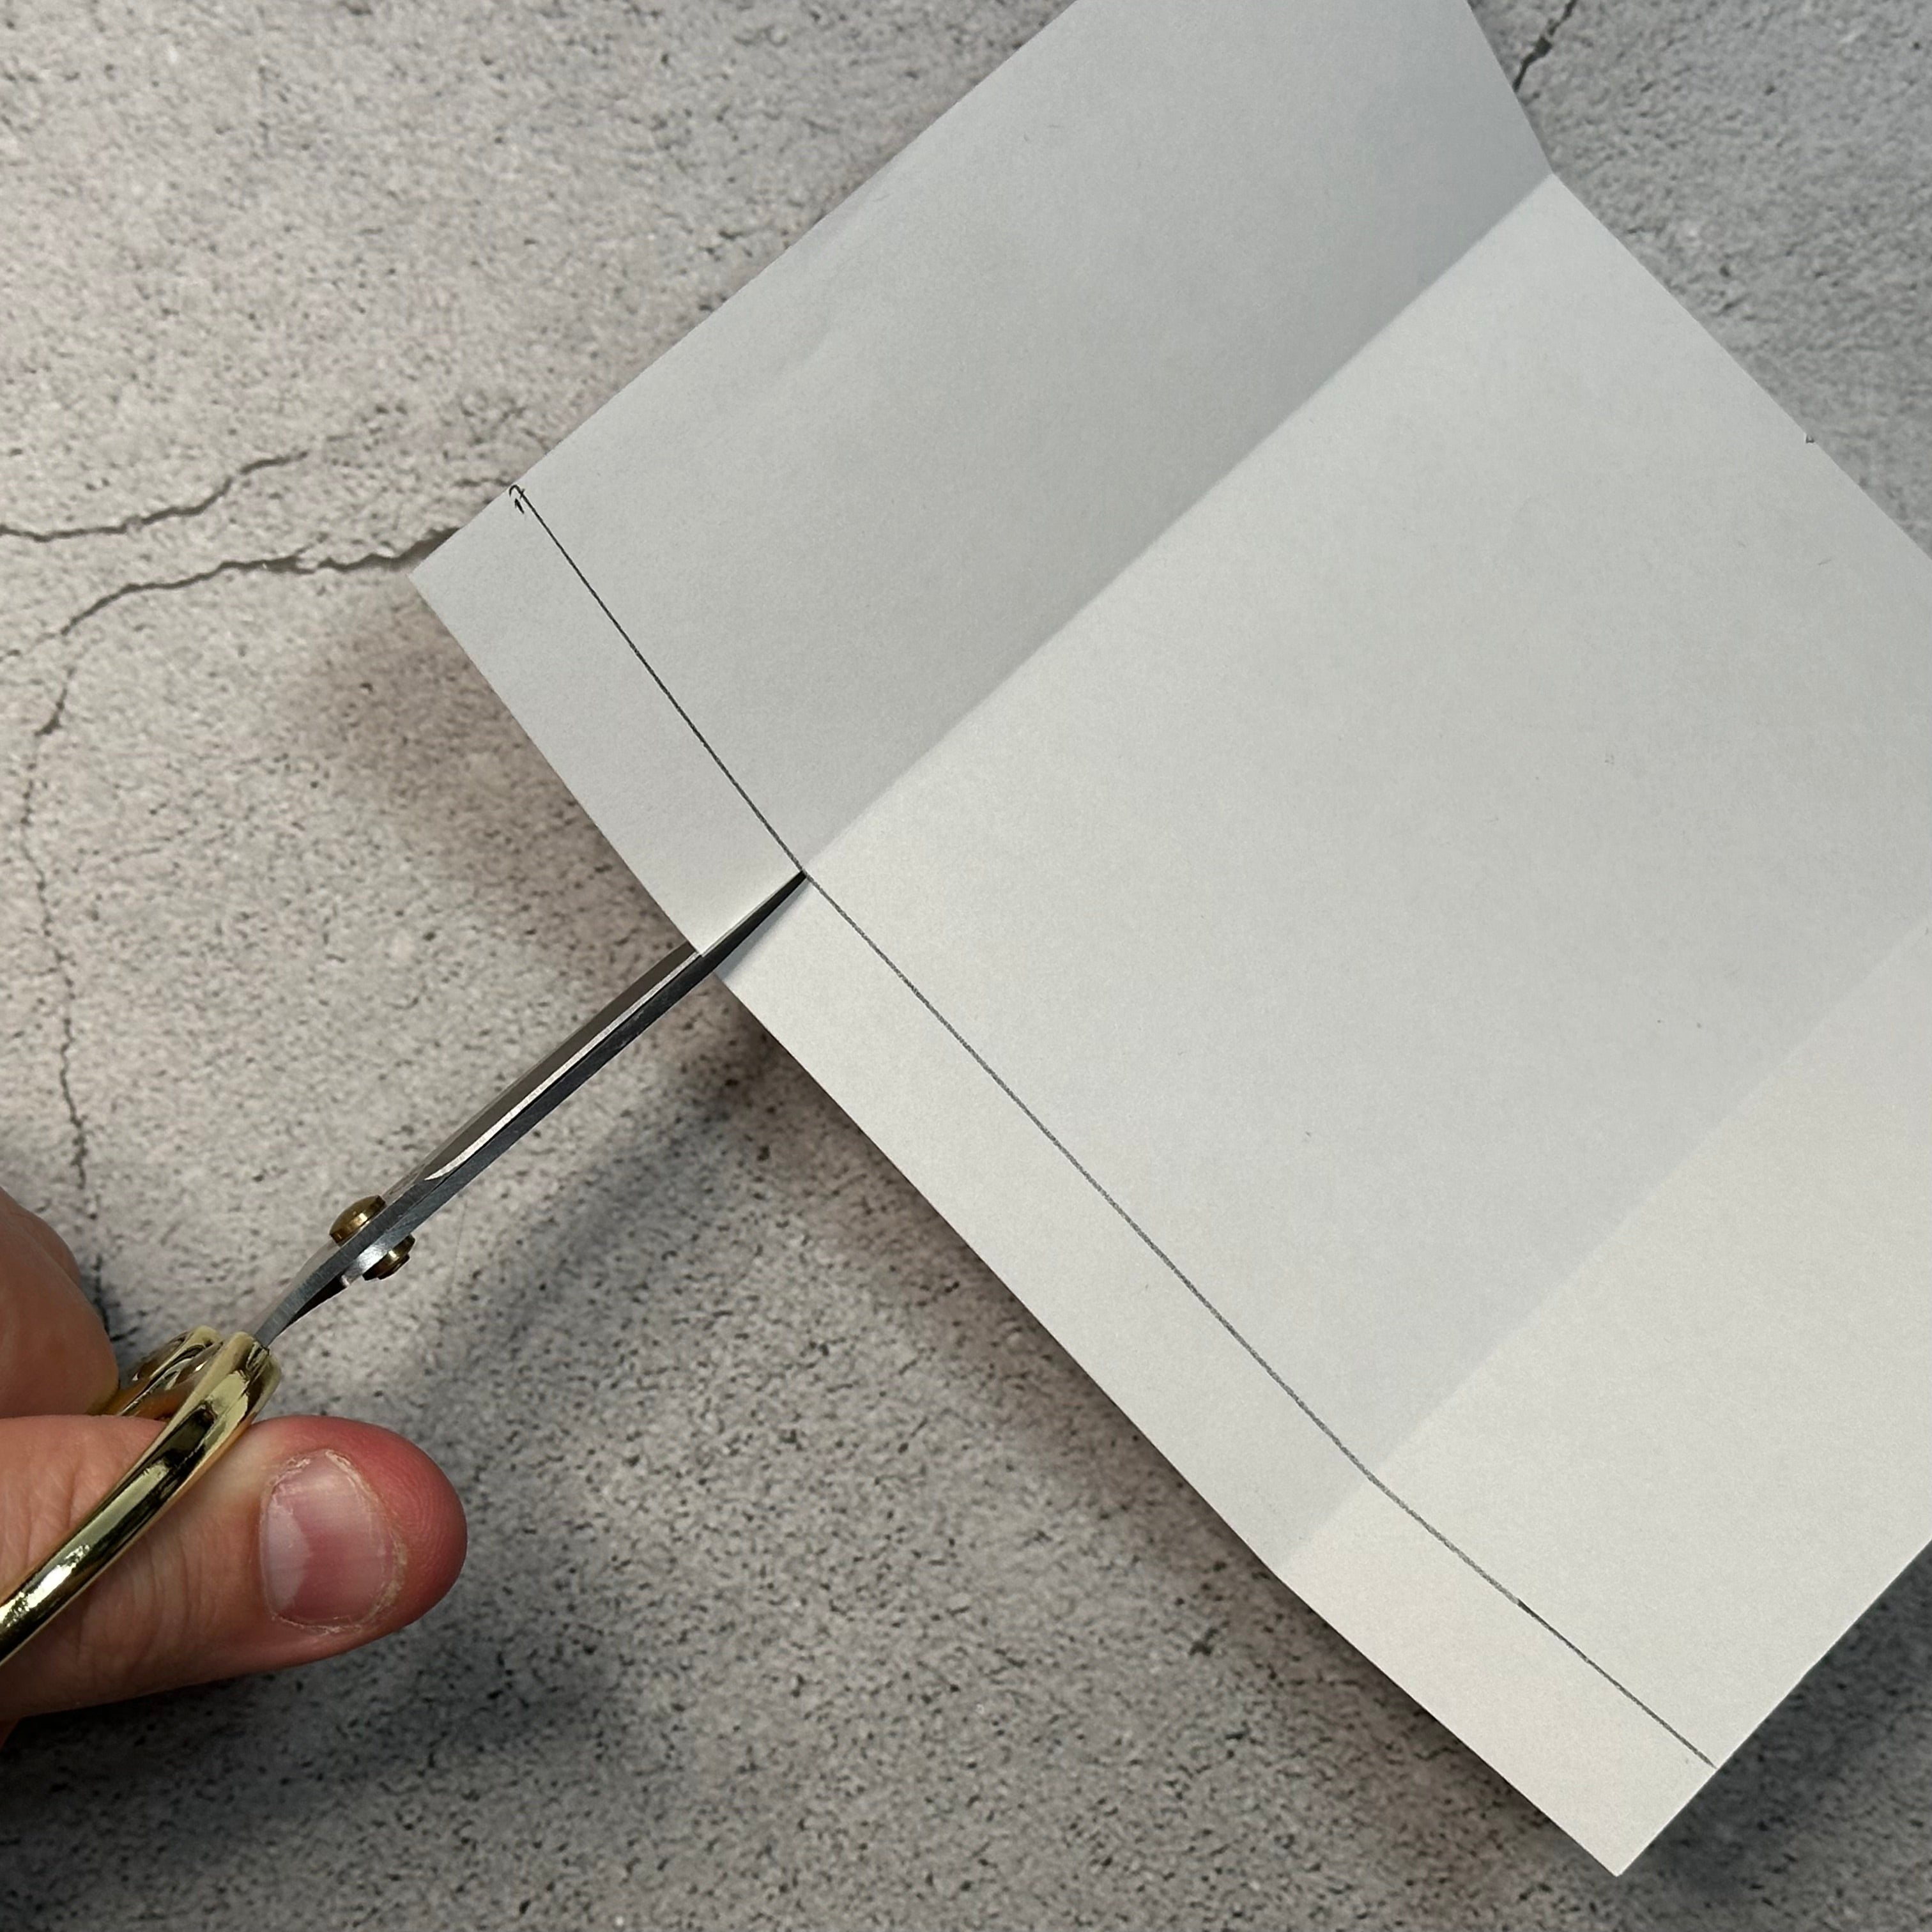 using scissors to cut the fold and line of paper.